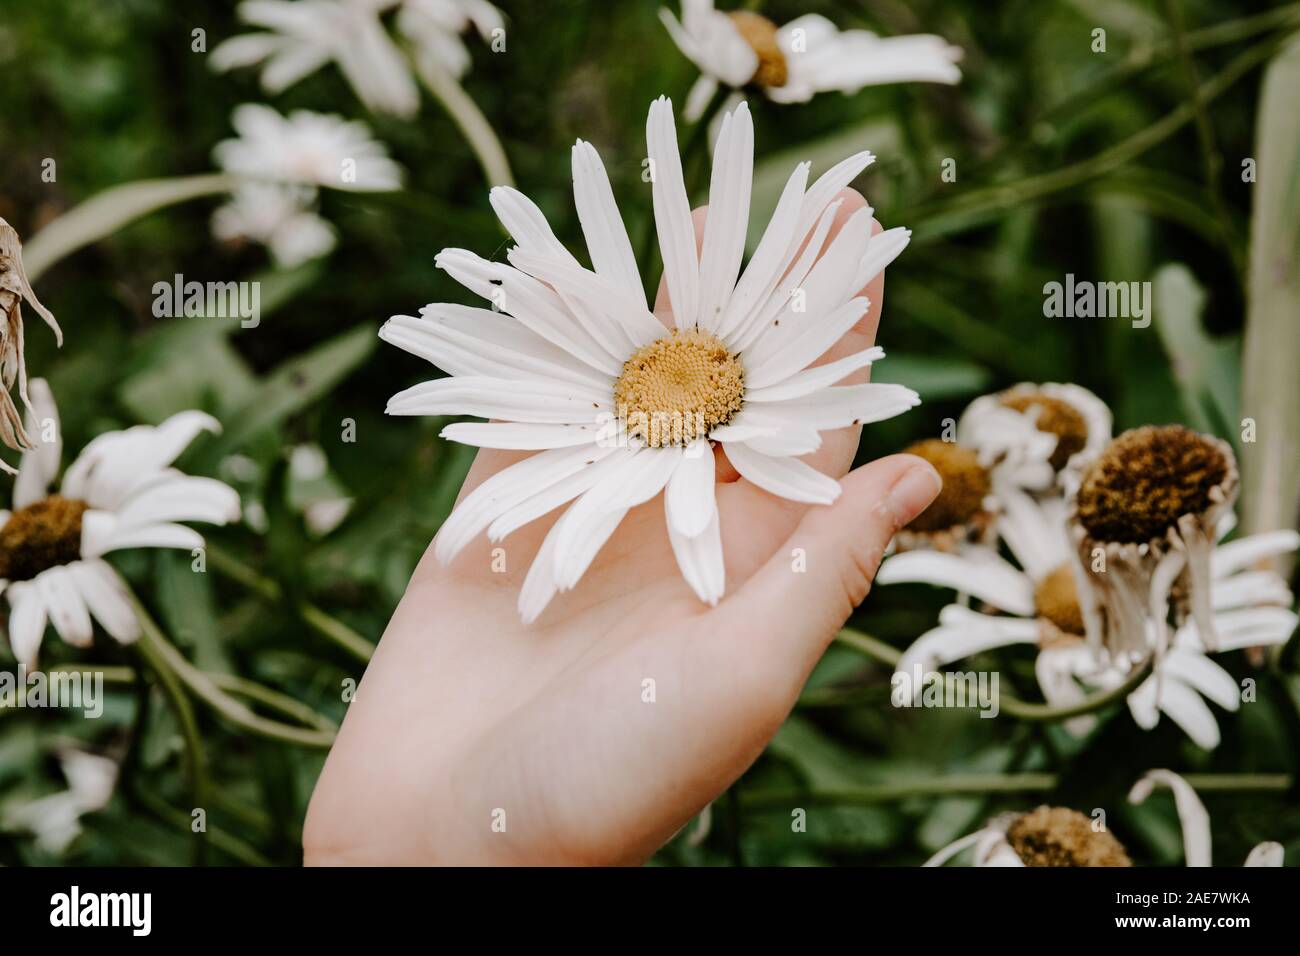 Open hand holding daisy, large daisy, love nature concept, spring flowers, white wildflower, feminine, delicate, tenderness, little things Stock Photo